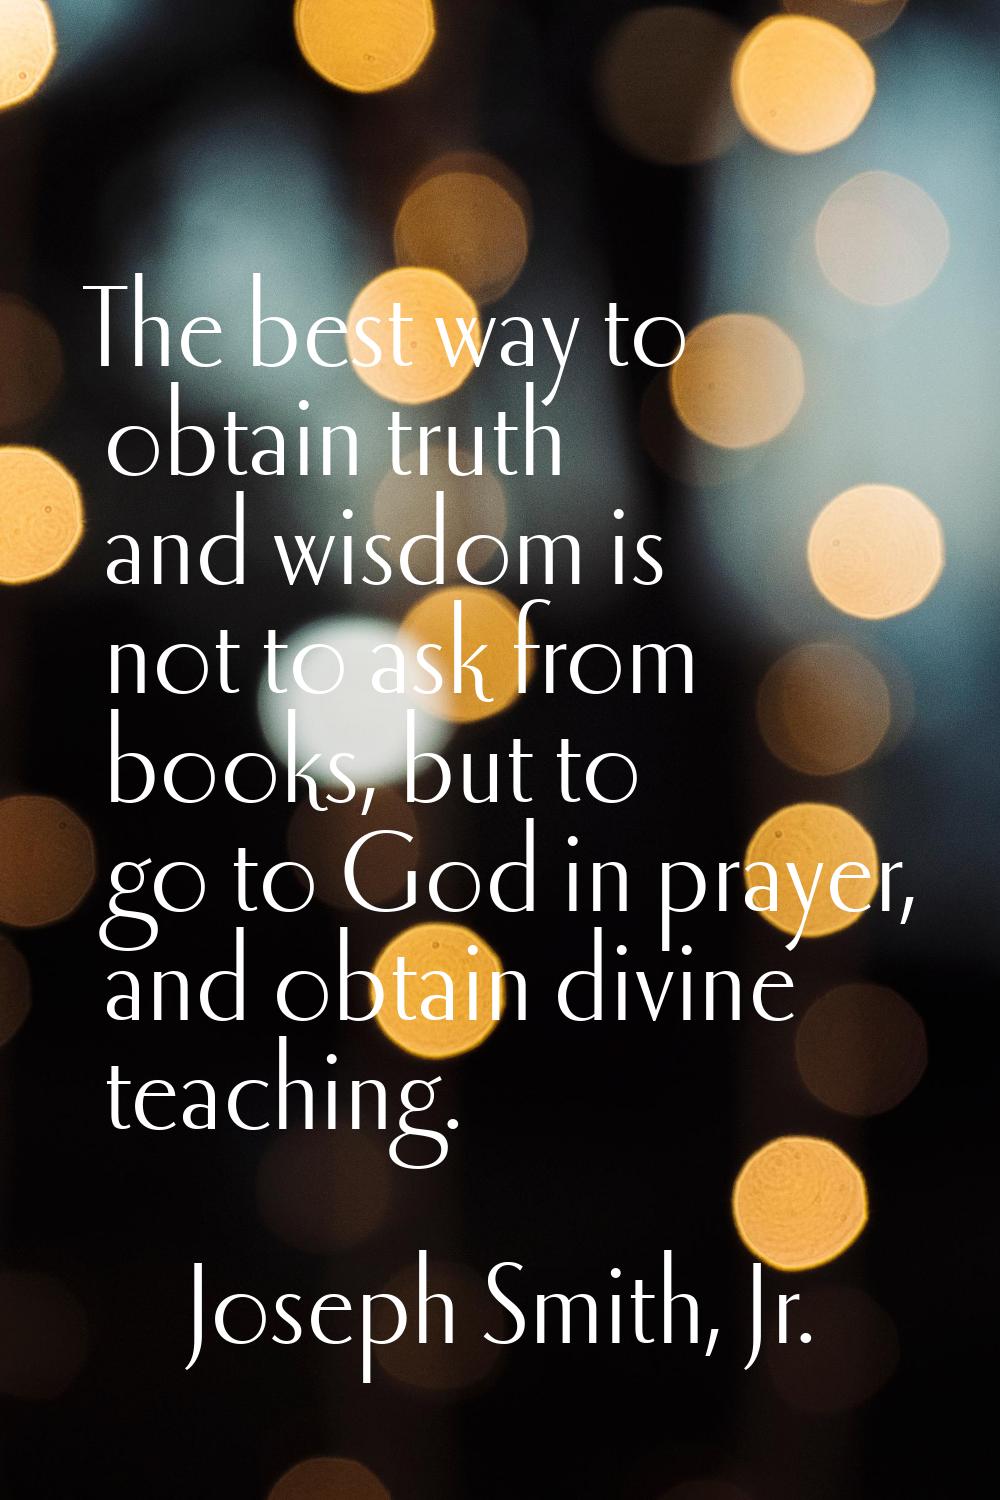 The best way to obtain truth and wisdom is not to ask from books, but to go to God in prayer, and o